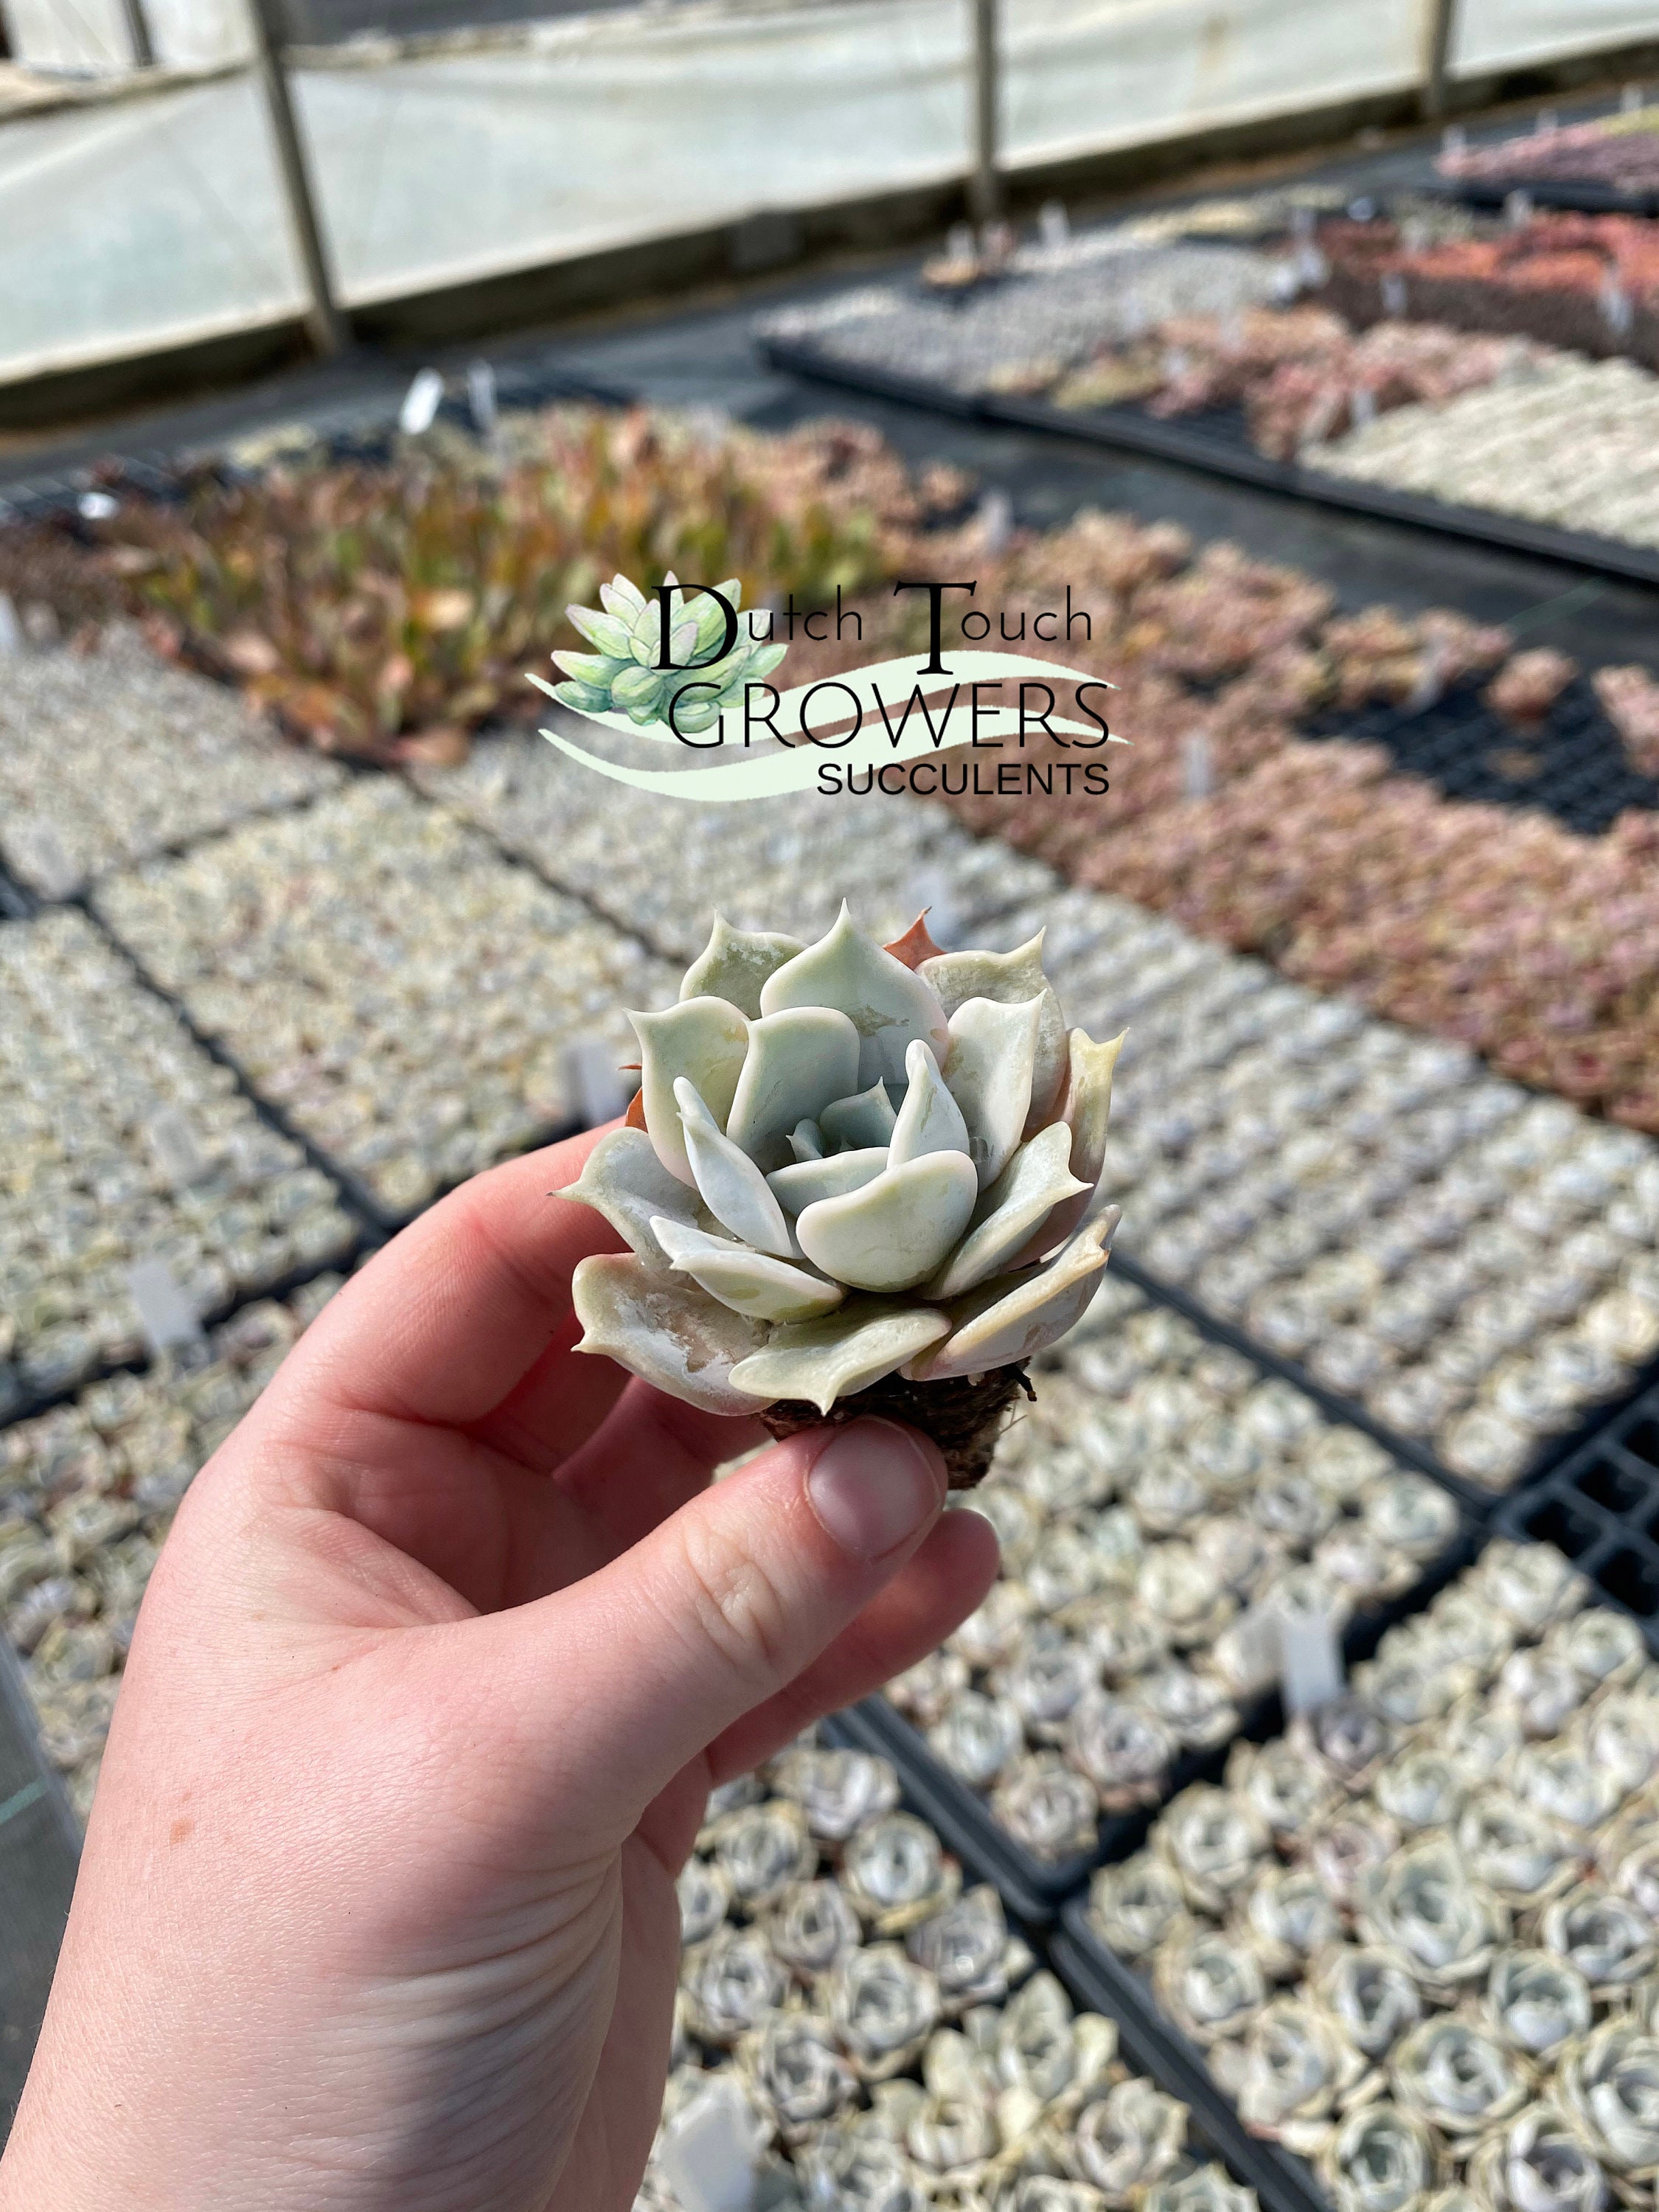 Live Rooted-Echeveria Lilacina  2" Pot Succulent Looks Like A Lotus Flower 